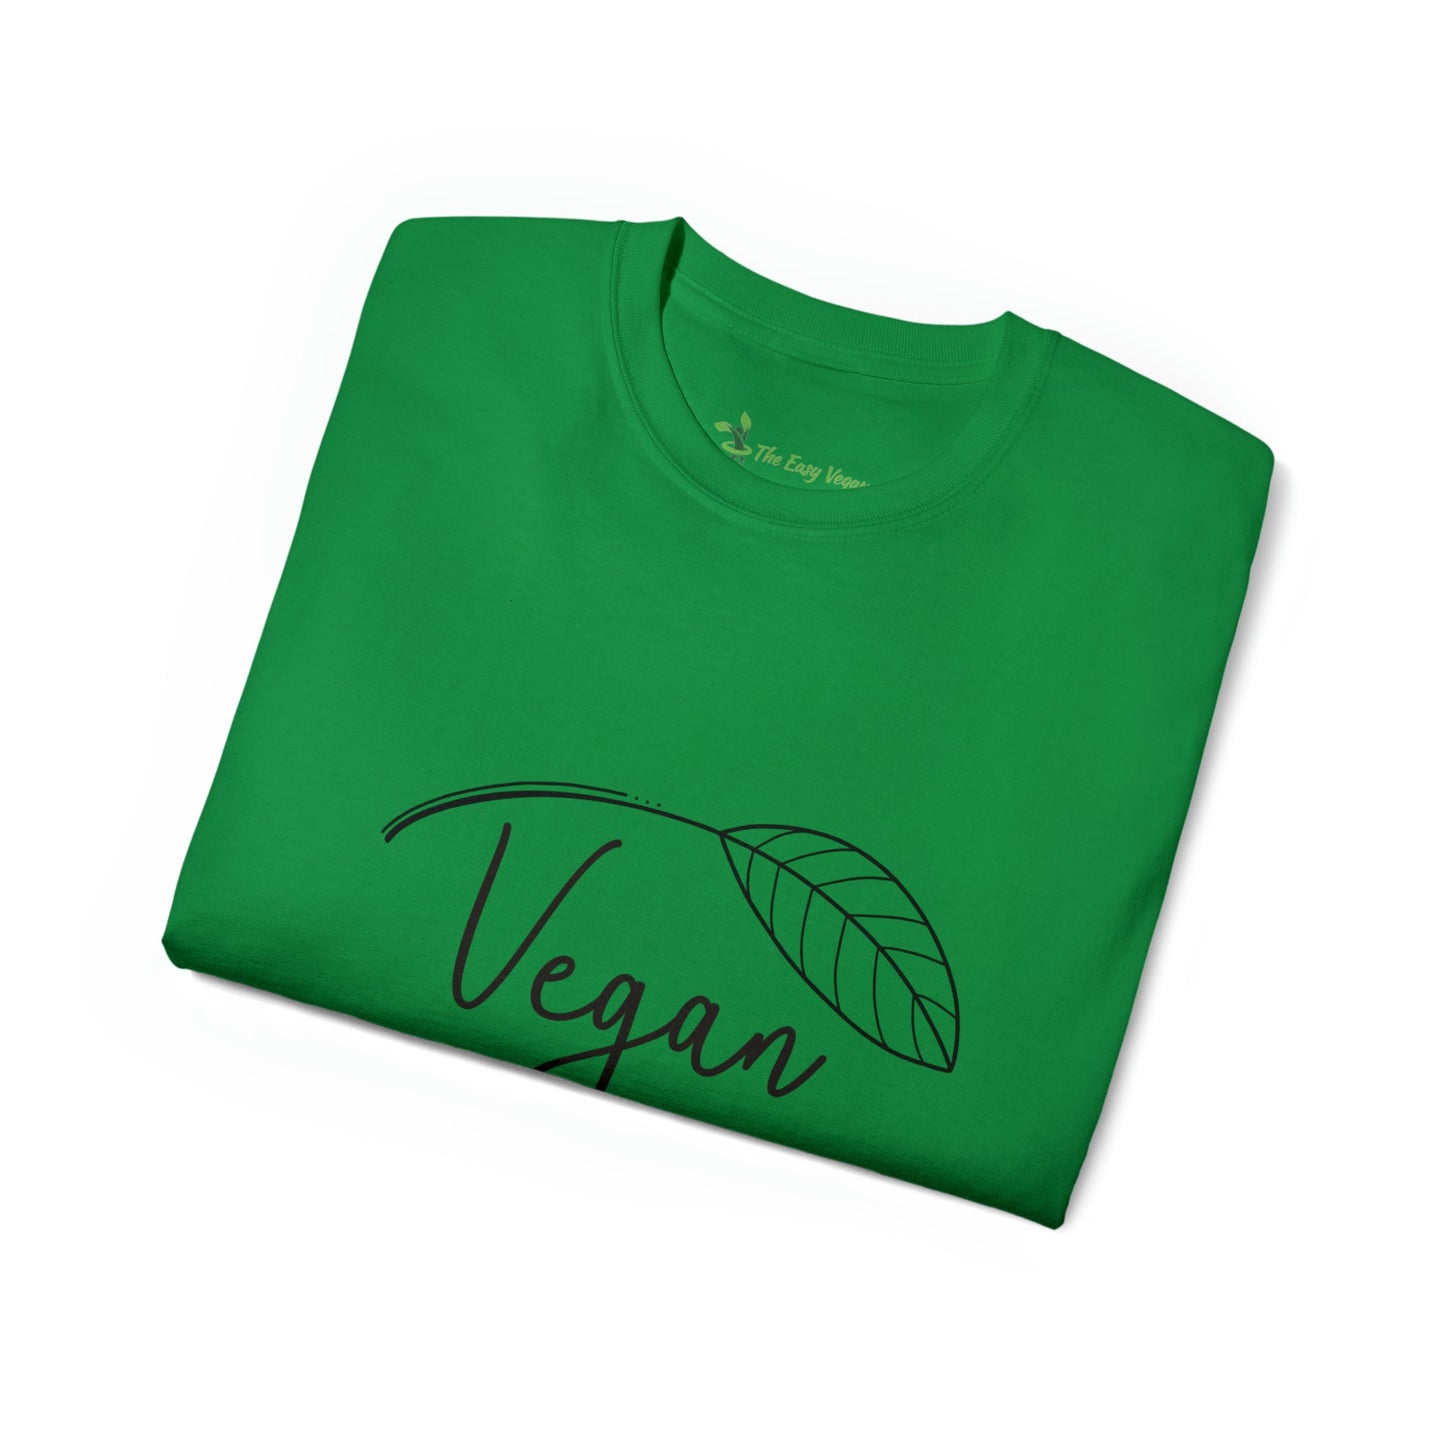 100 Percent Vegan - Printed front and back - Cotton Tee